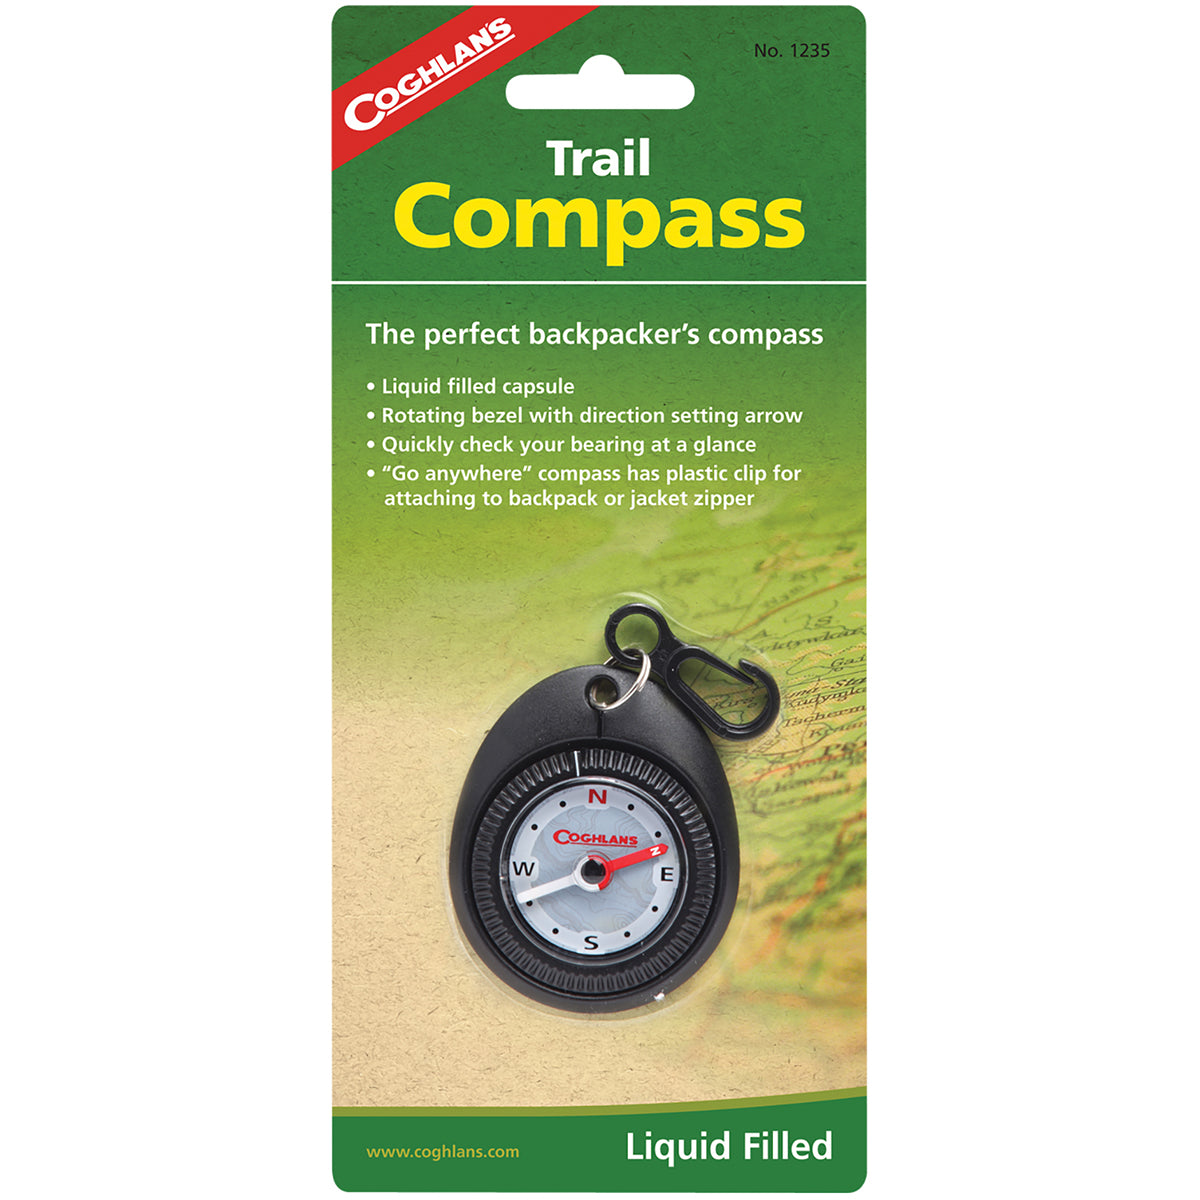 Coghlan's Trail Compass w/ Attached Clip, Liquid Filled for Backpackers Hiking Coghlan's